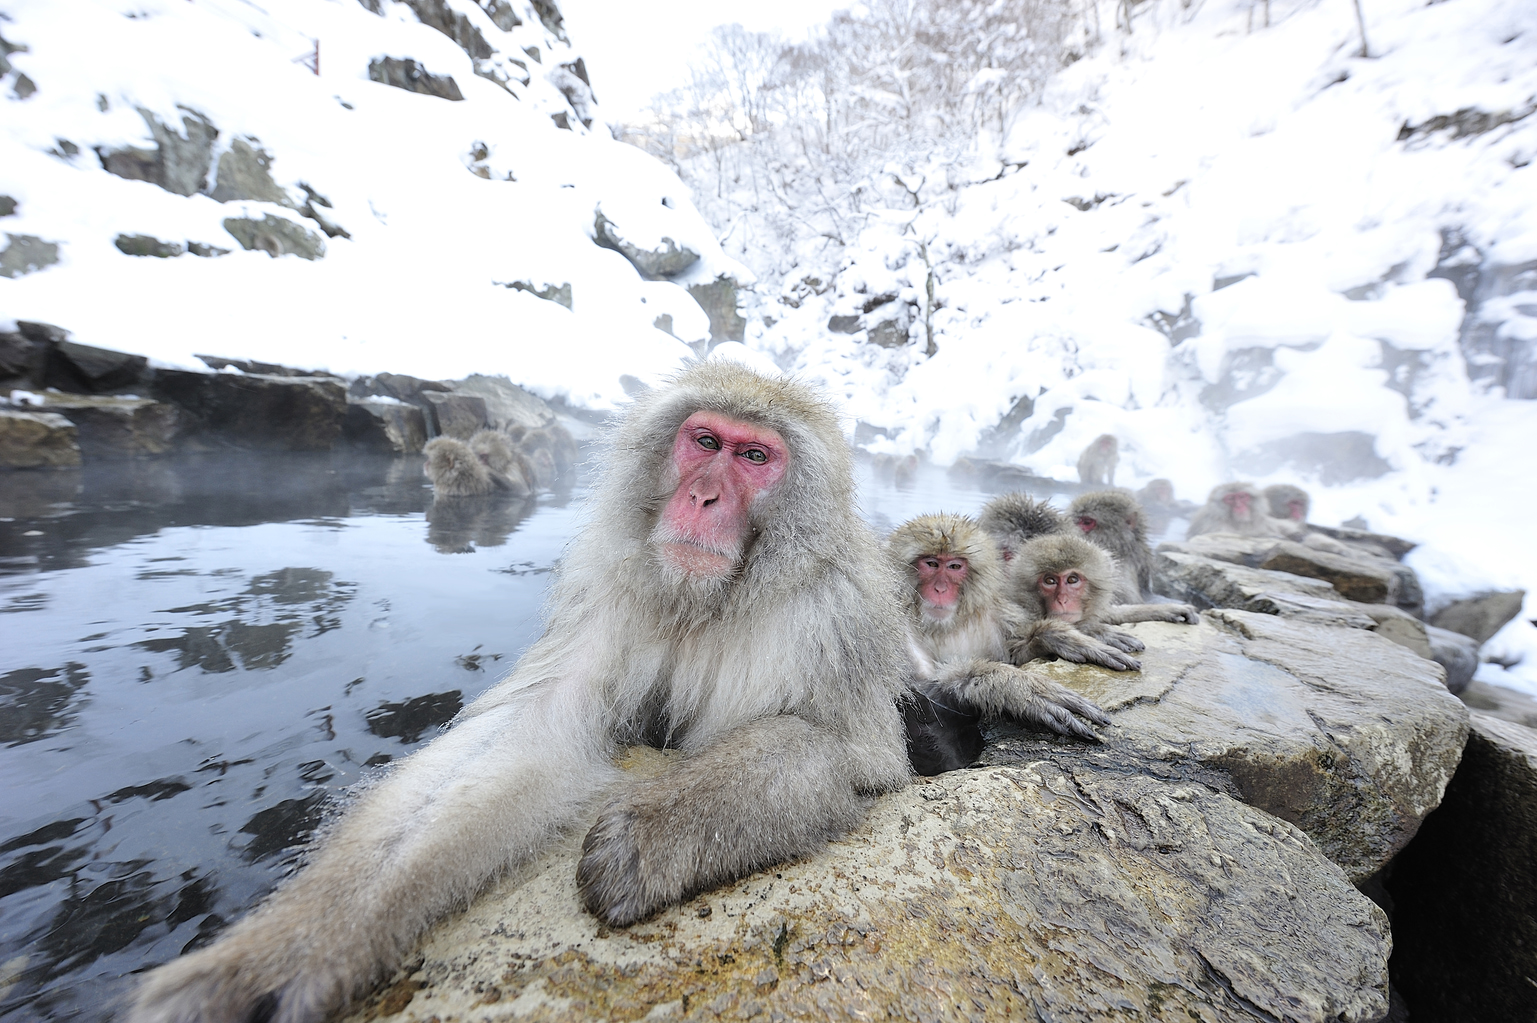 Why You Should Visit Nagano This Winter: Skiing, Temple Stays and Snow Monkeys